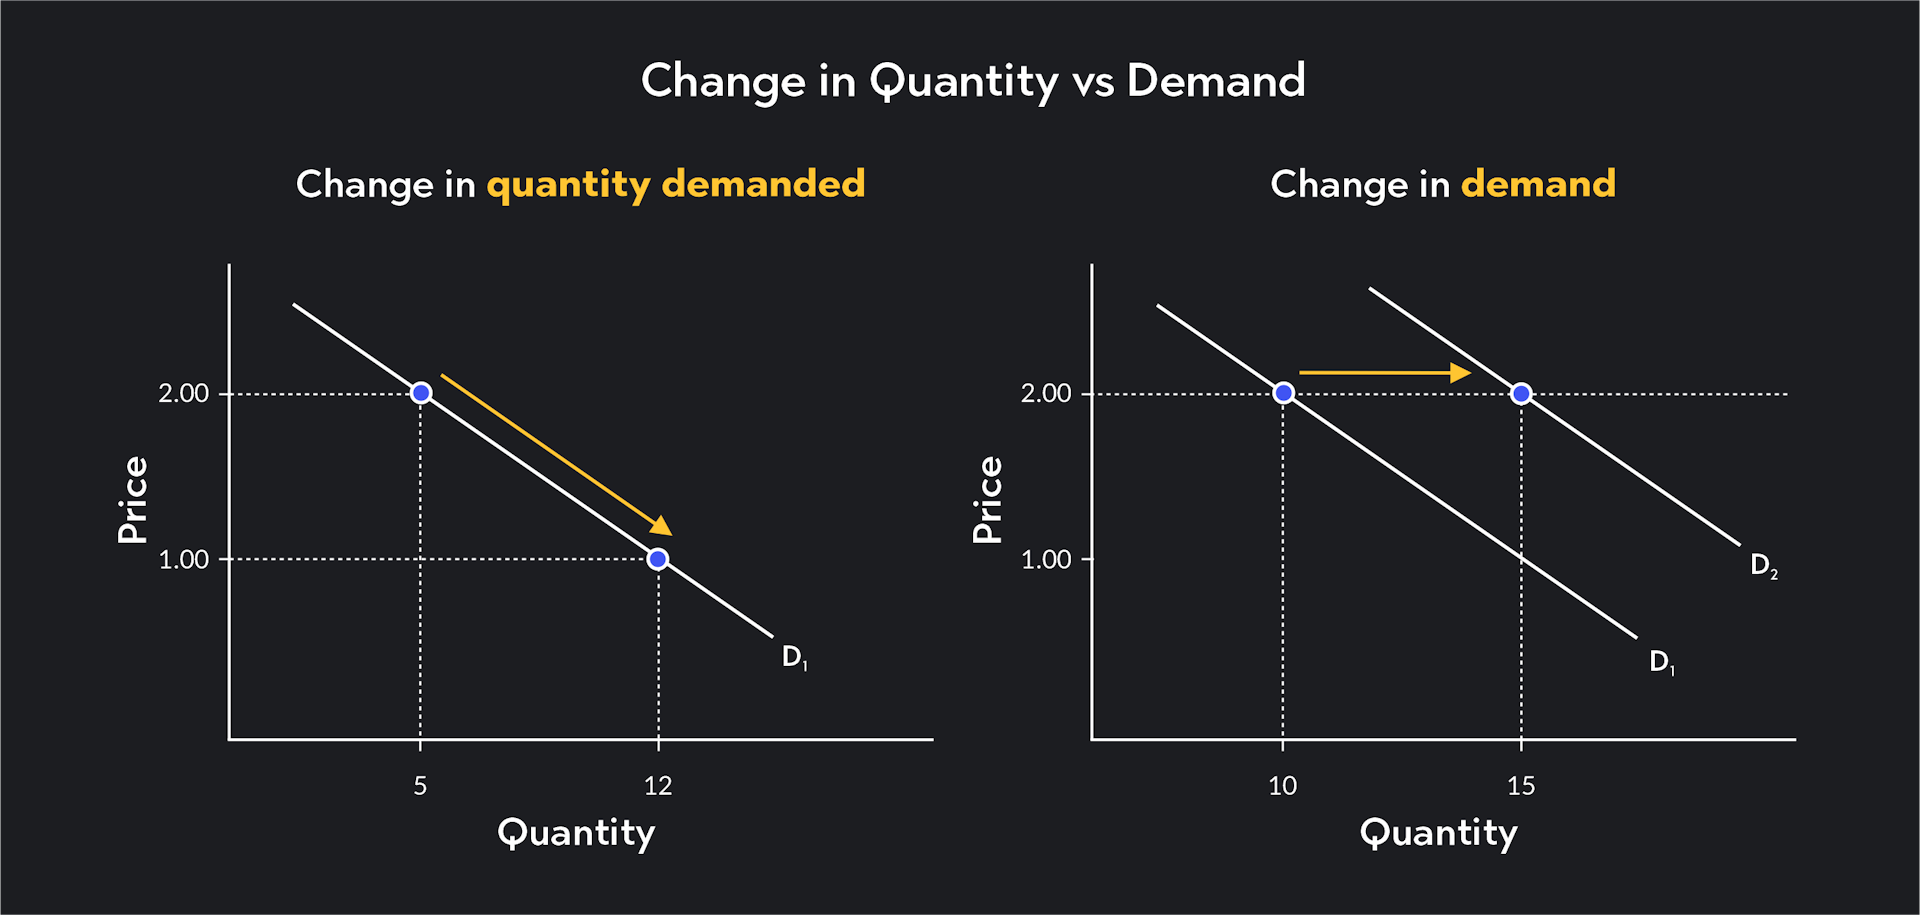 Graph showing change in quantity demanded vs change in demand